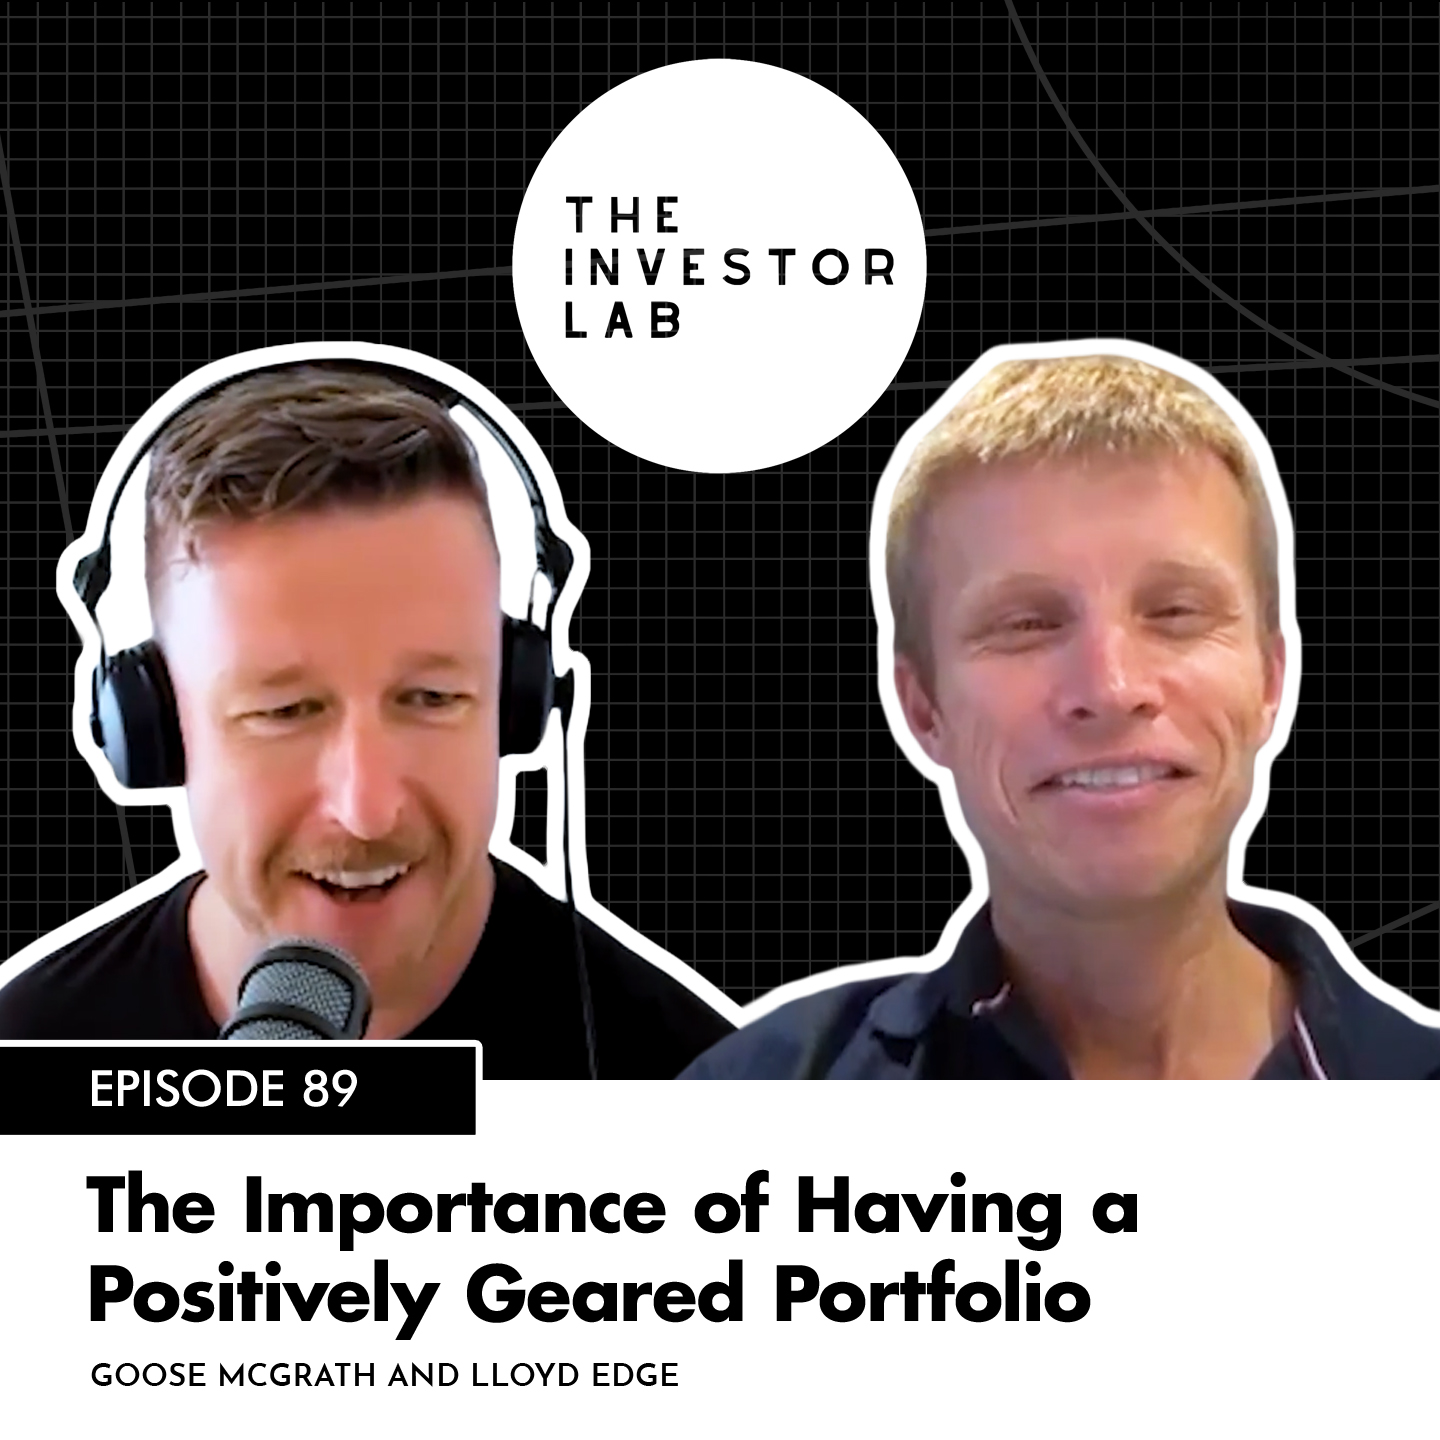 The Importance of Having a Positively Geared Portfolio with Lloyd Edge